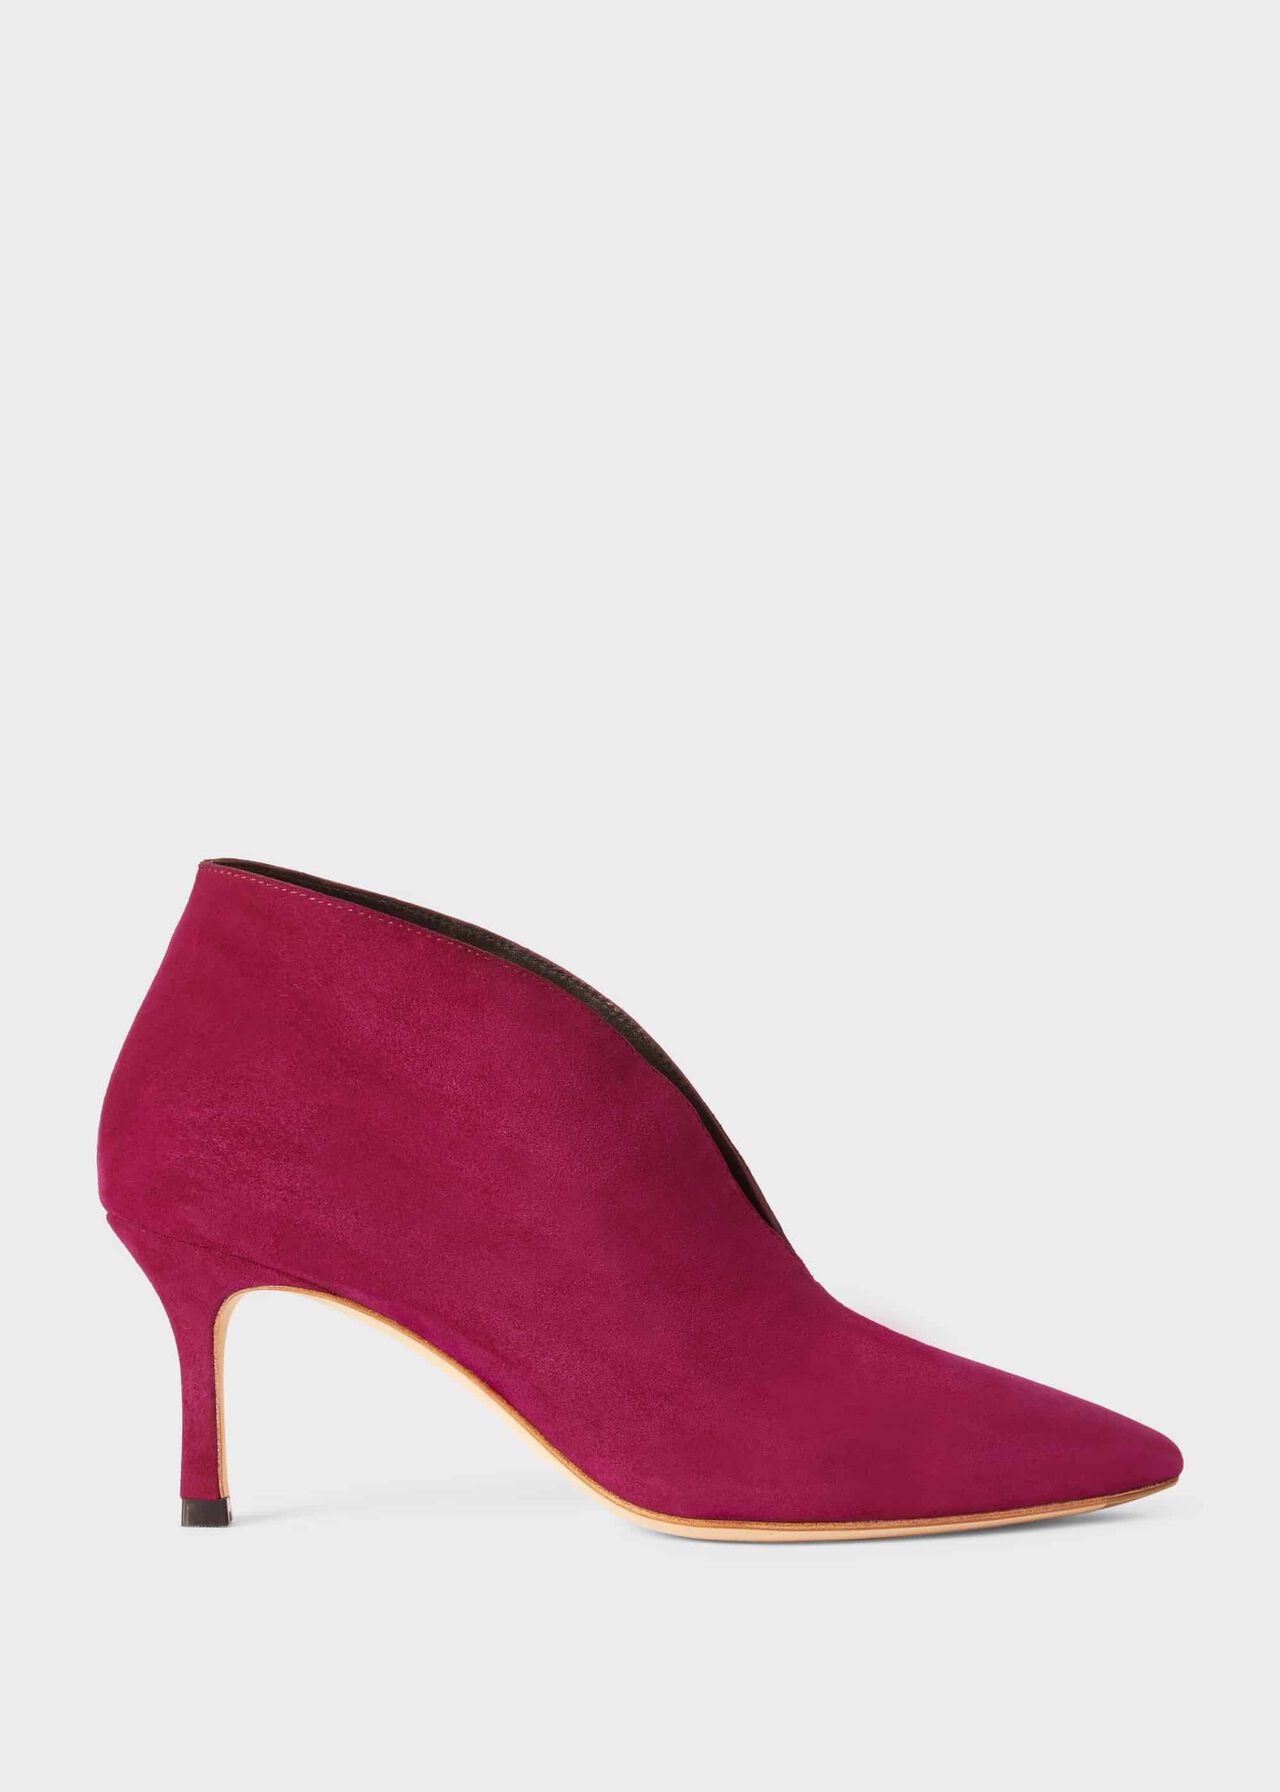 Sienna Suede Stiletto Ankle Boots, Raspberry, hi-res